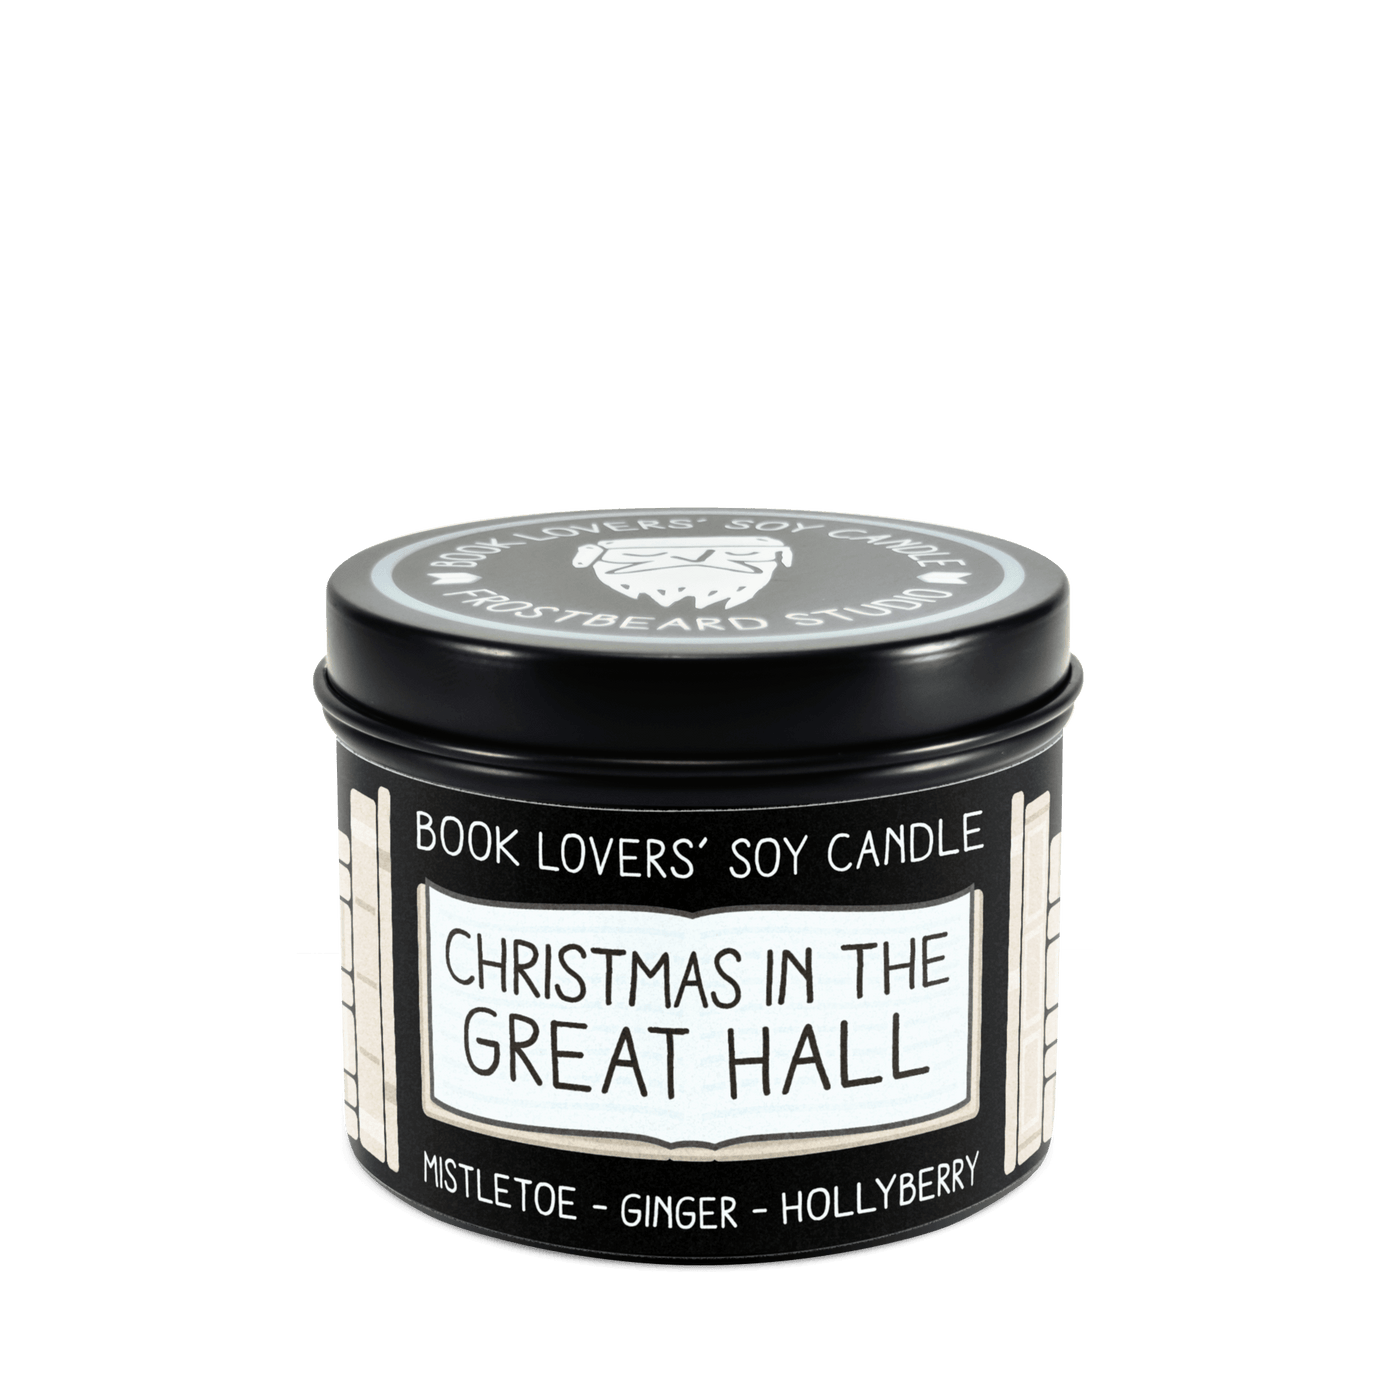 Christmas in the Great Hall  -  4 oz Tin  -  Book Lovers' Soy Candle  -  Frostbeard Studio